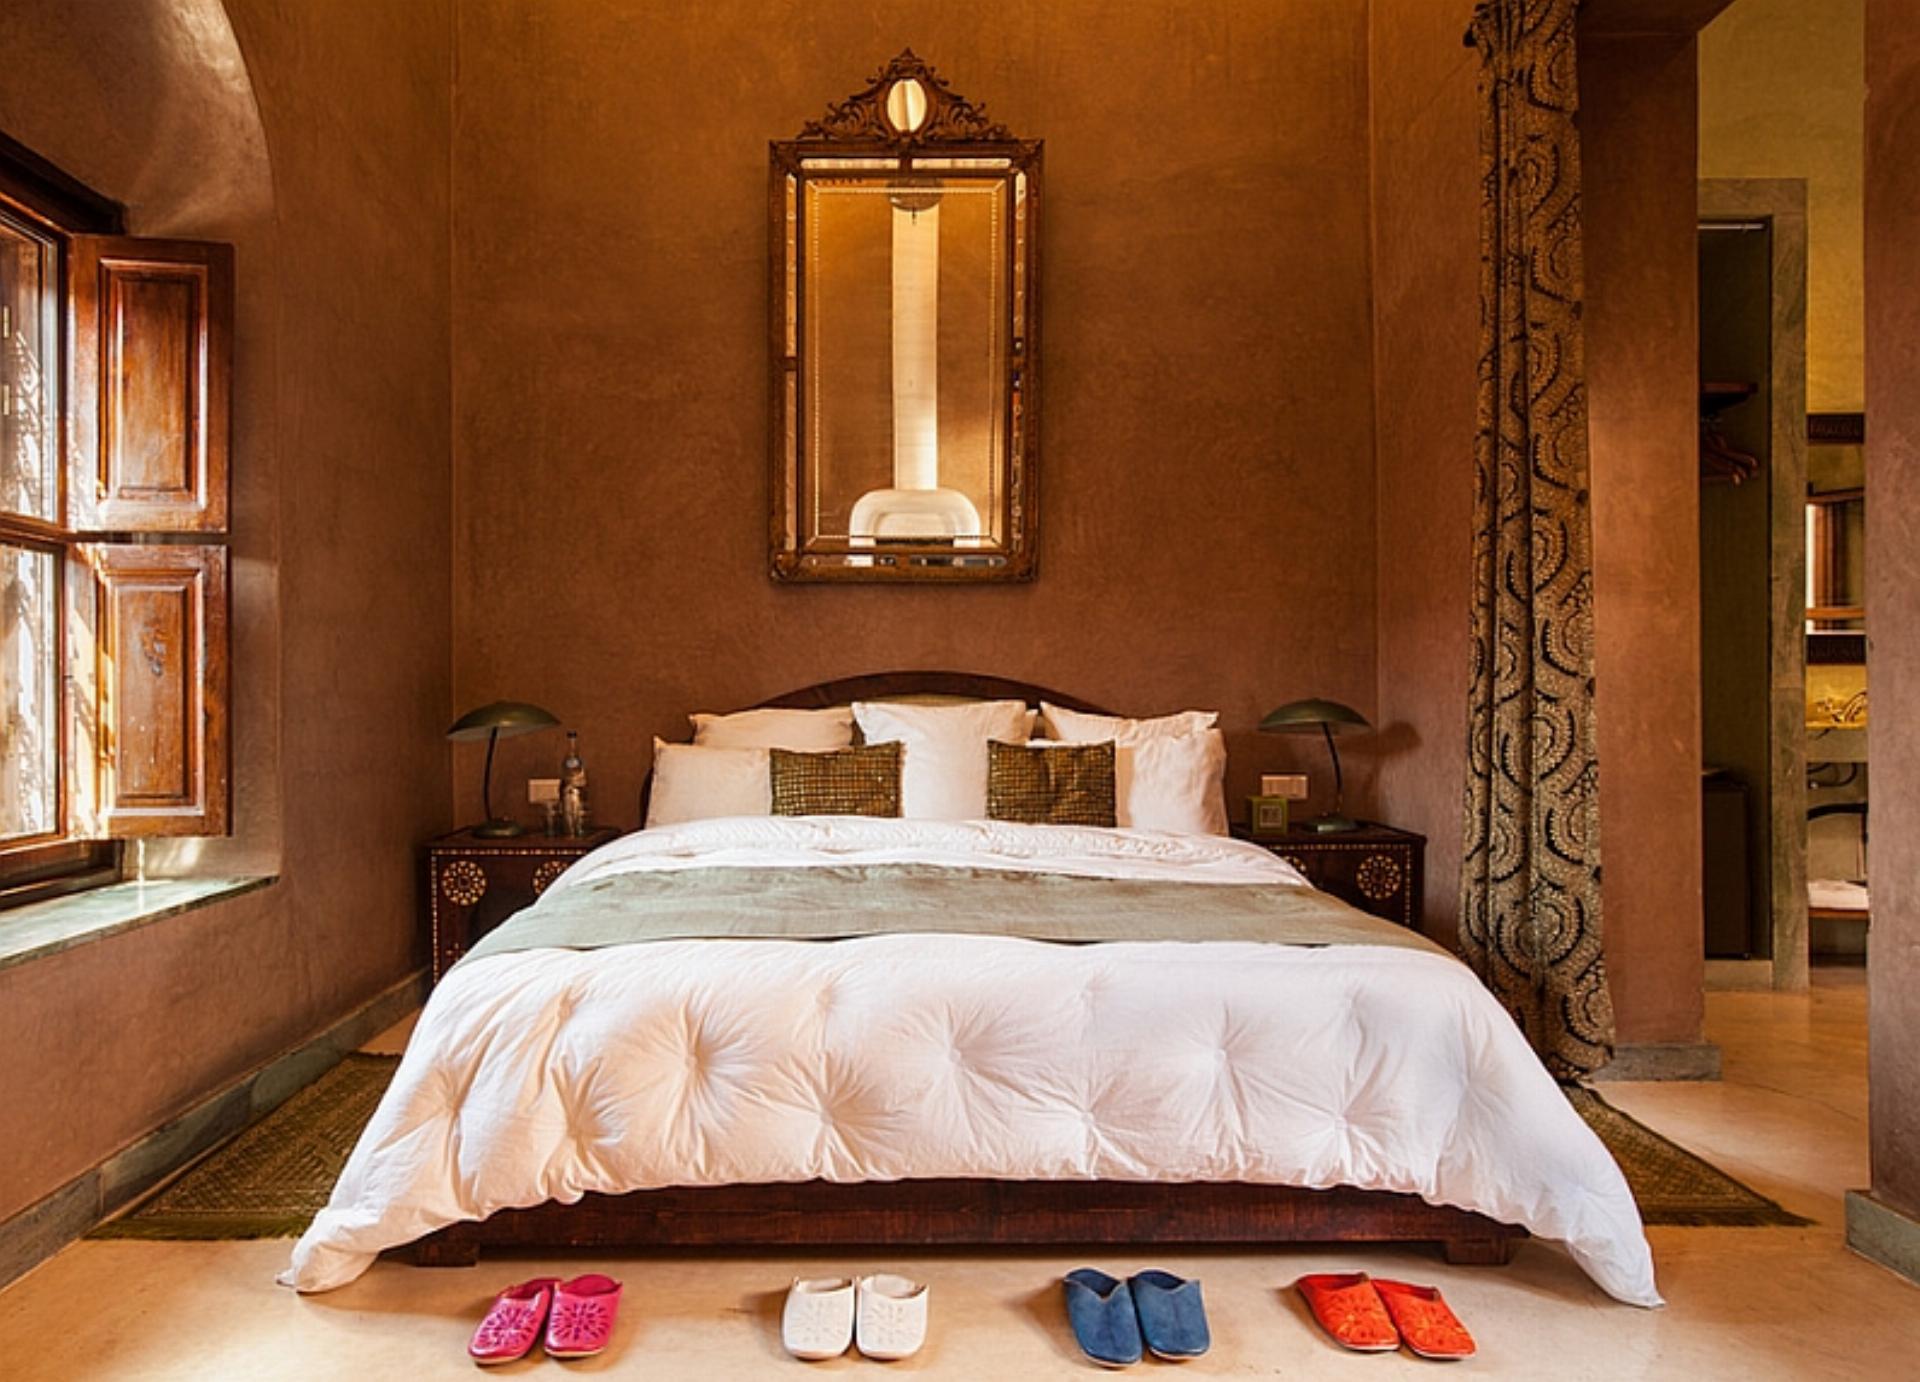 Bedroom decorated in a Moroccan style.